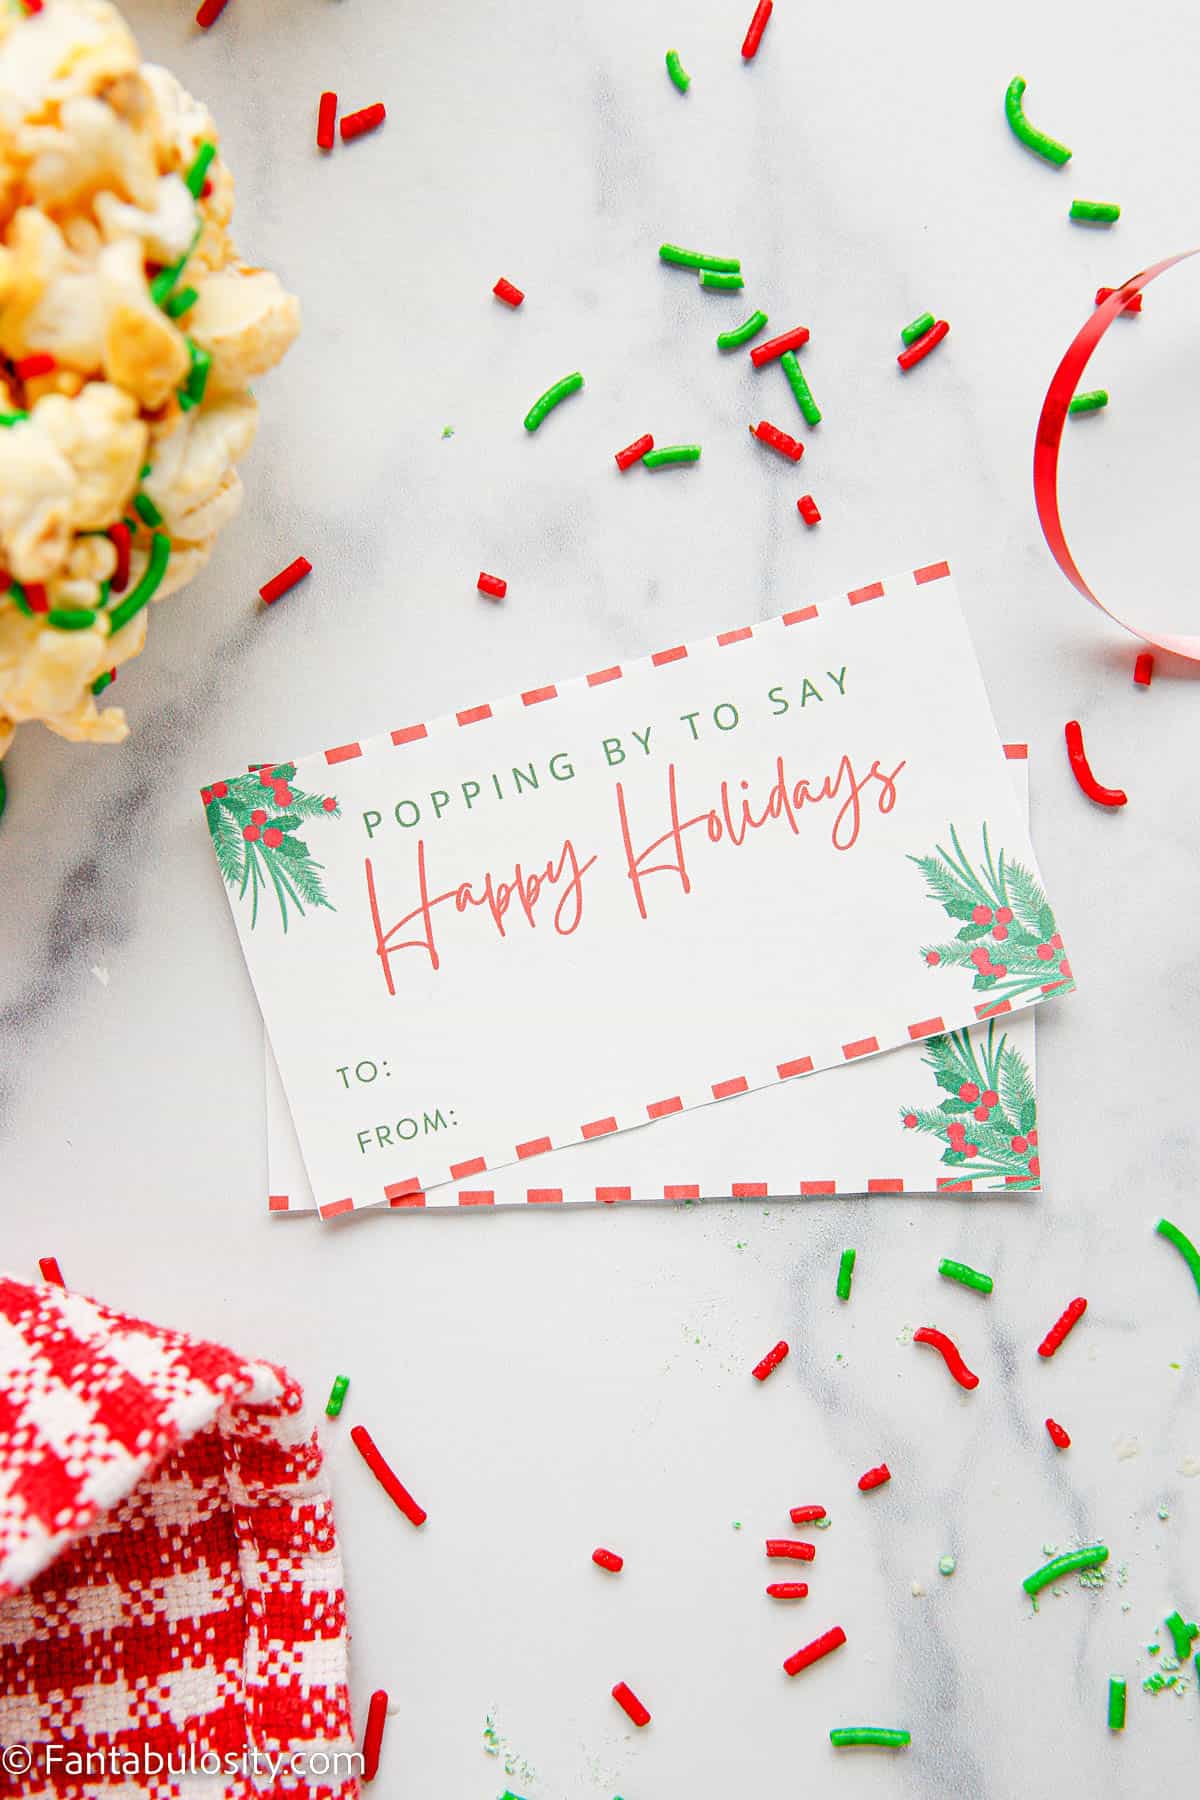 Gift tags that read "Popping By to say Happy Holidays" are displayed on a white marble background surrounded with colorful Christmas colored sprinkles